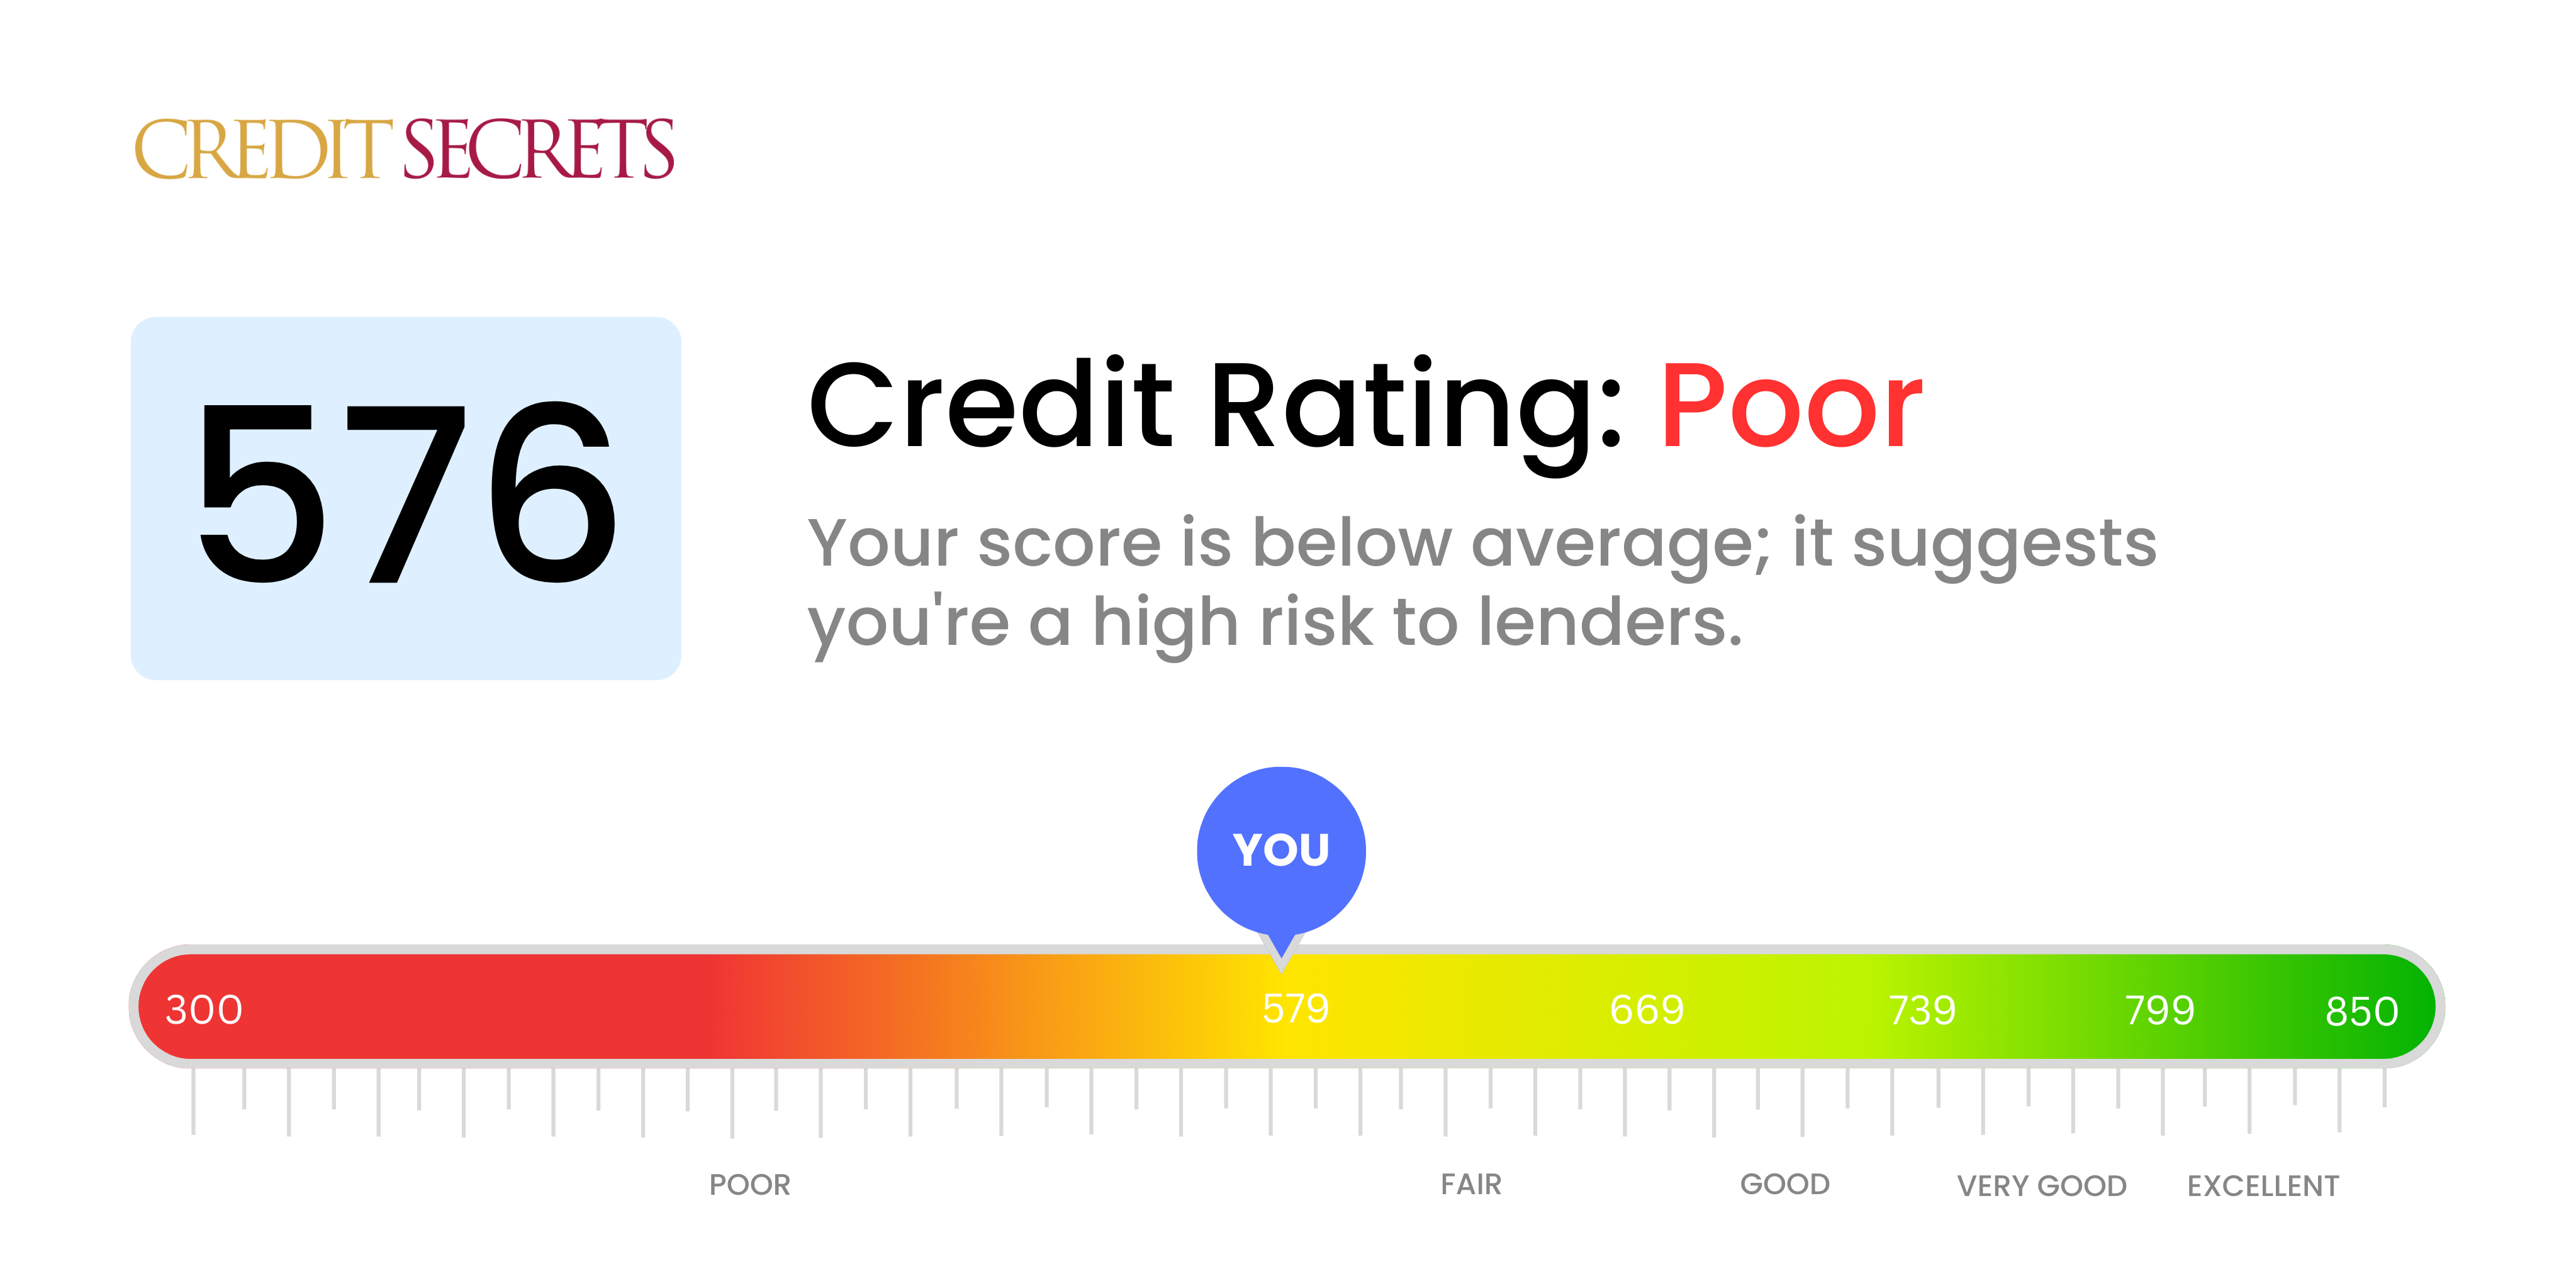 Is 576 a good credit score?